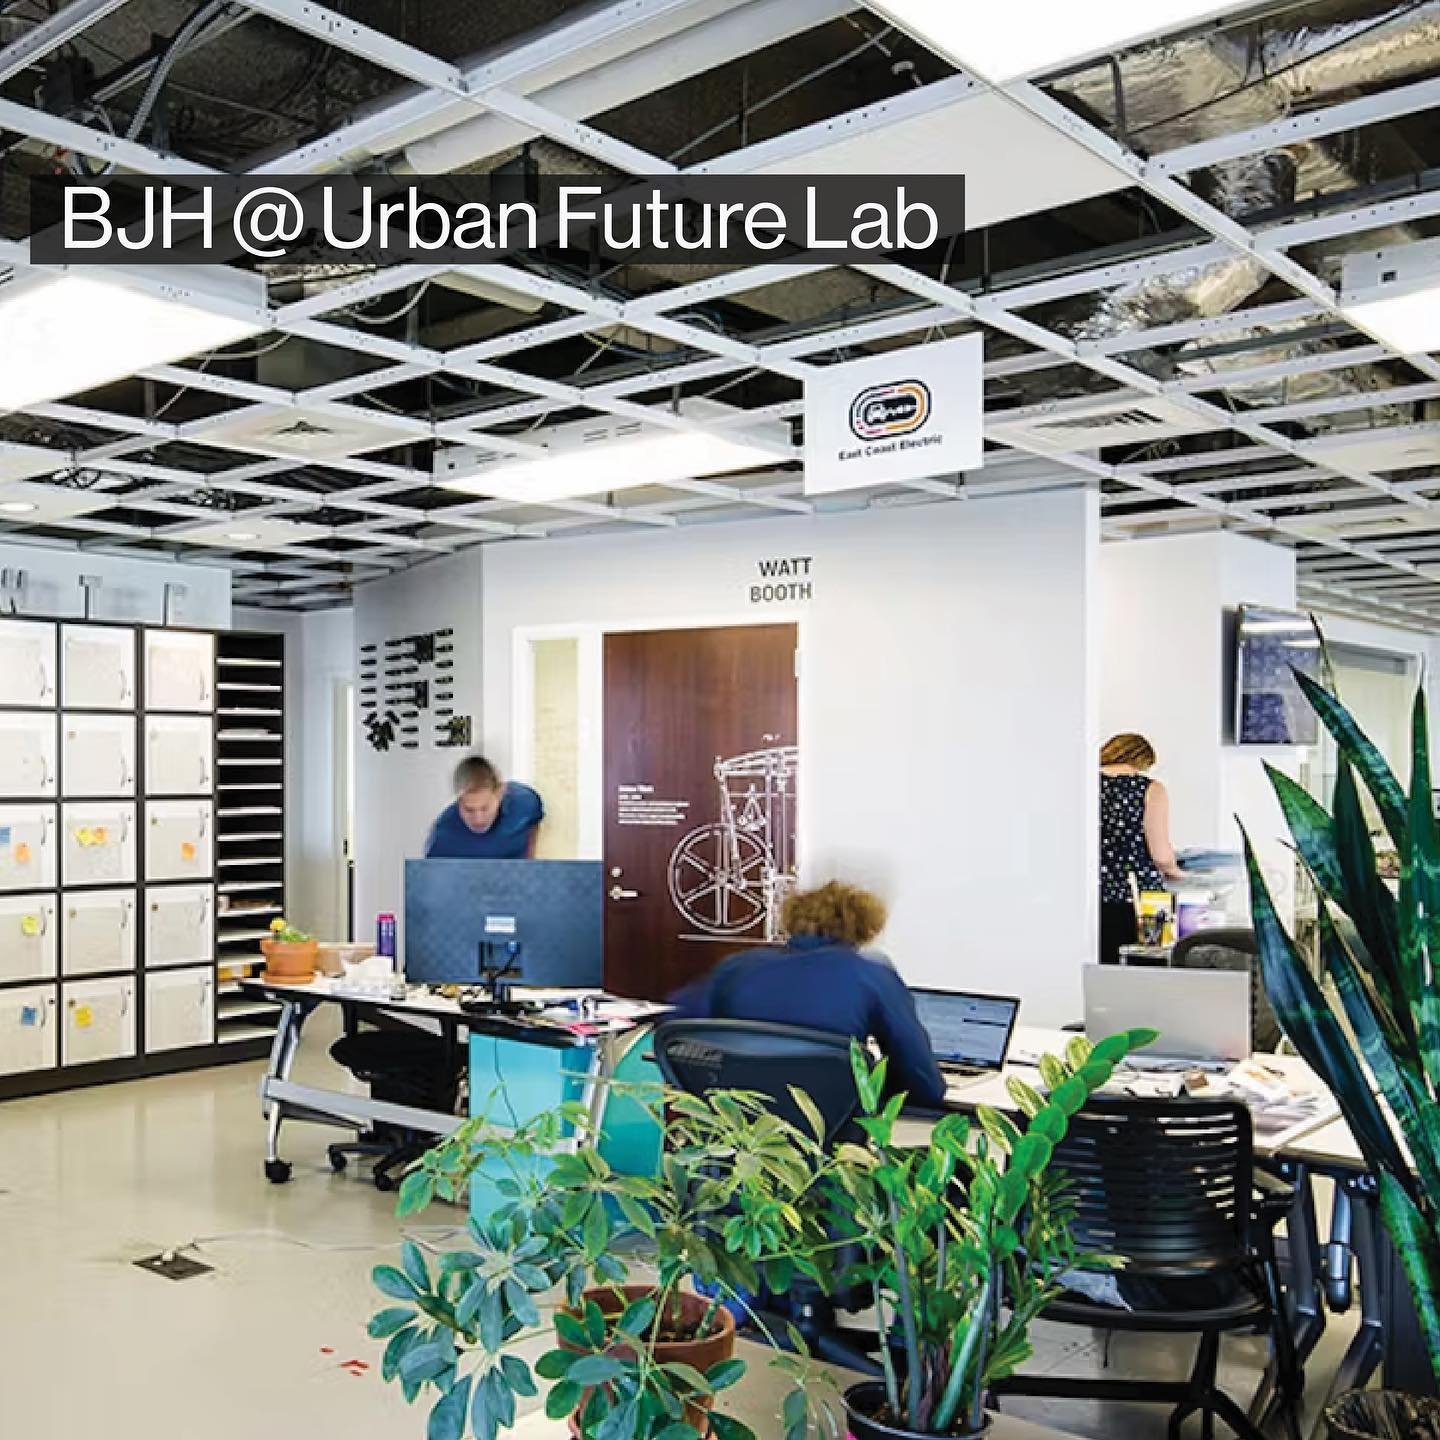 BJH recently had the opportunity to tour and learn more about Urban Future Lab at NYU Tandon. Urban Future Lab, founded in 2009, is an incubation program where climatetech start-ups gain access to workspace, fundraising support, commercial pilots, an